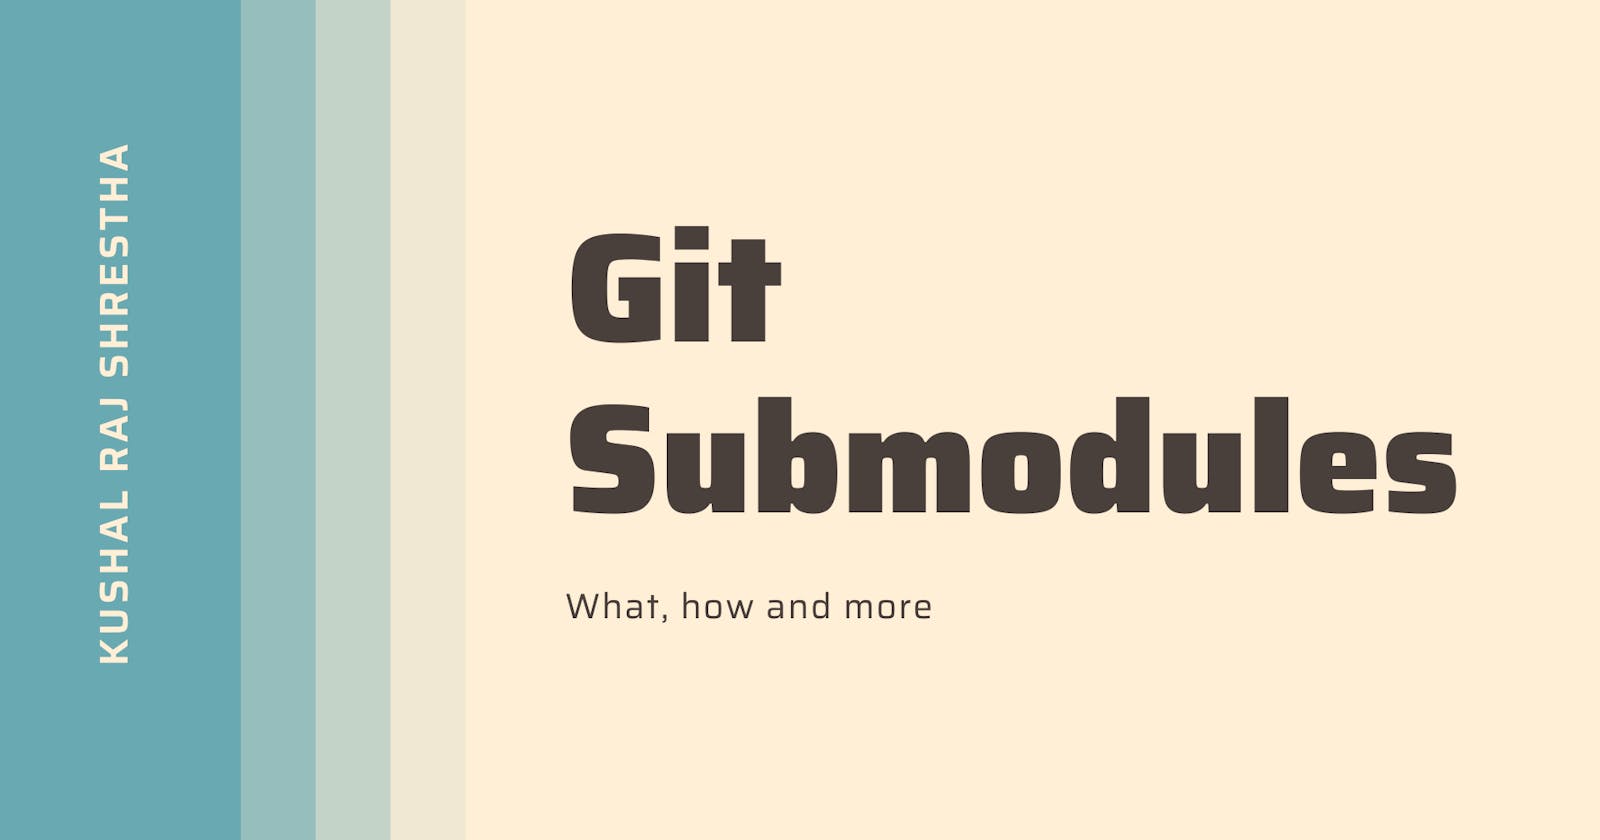 Git Submodules - What, how and more